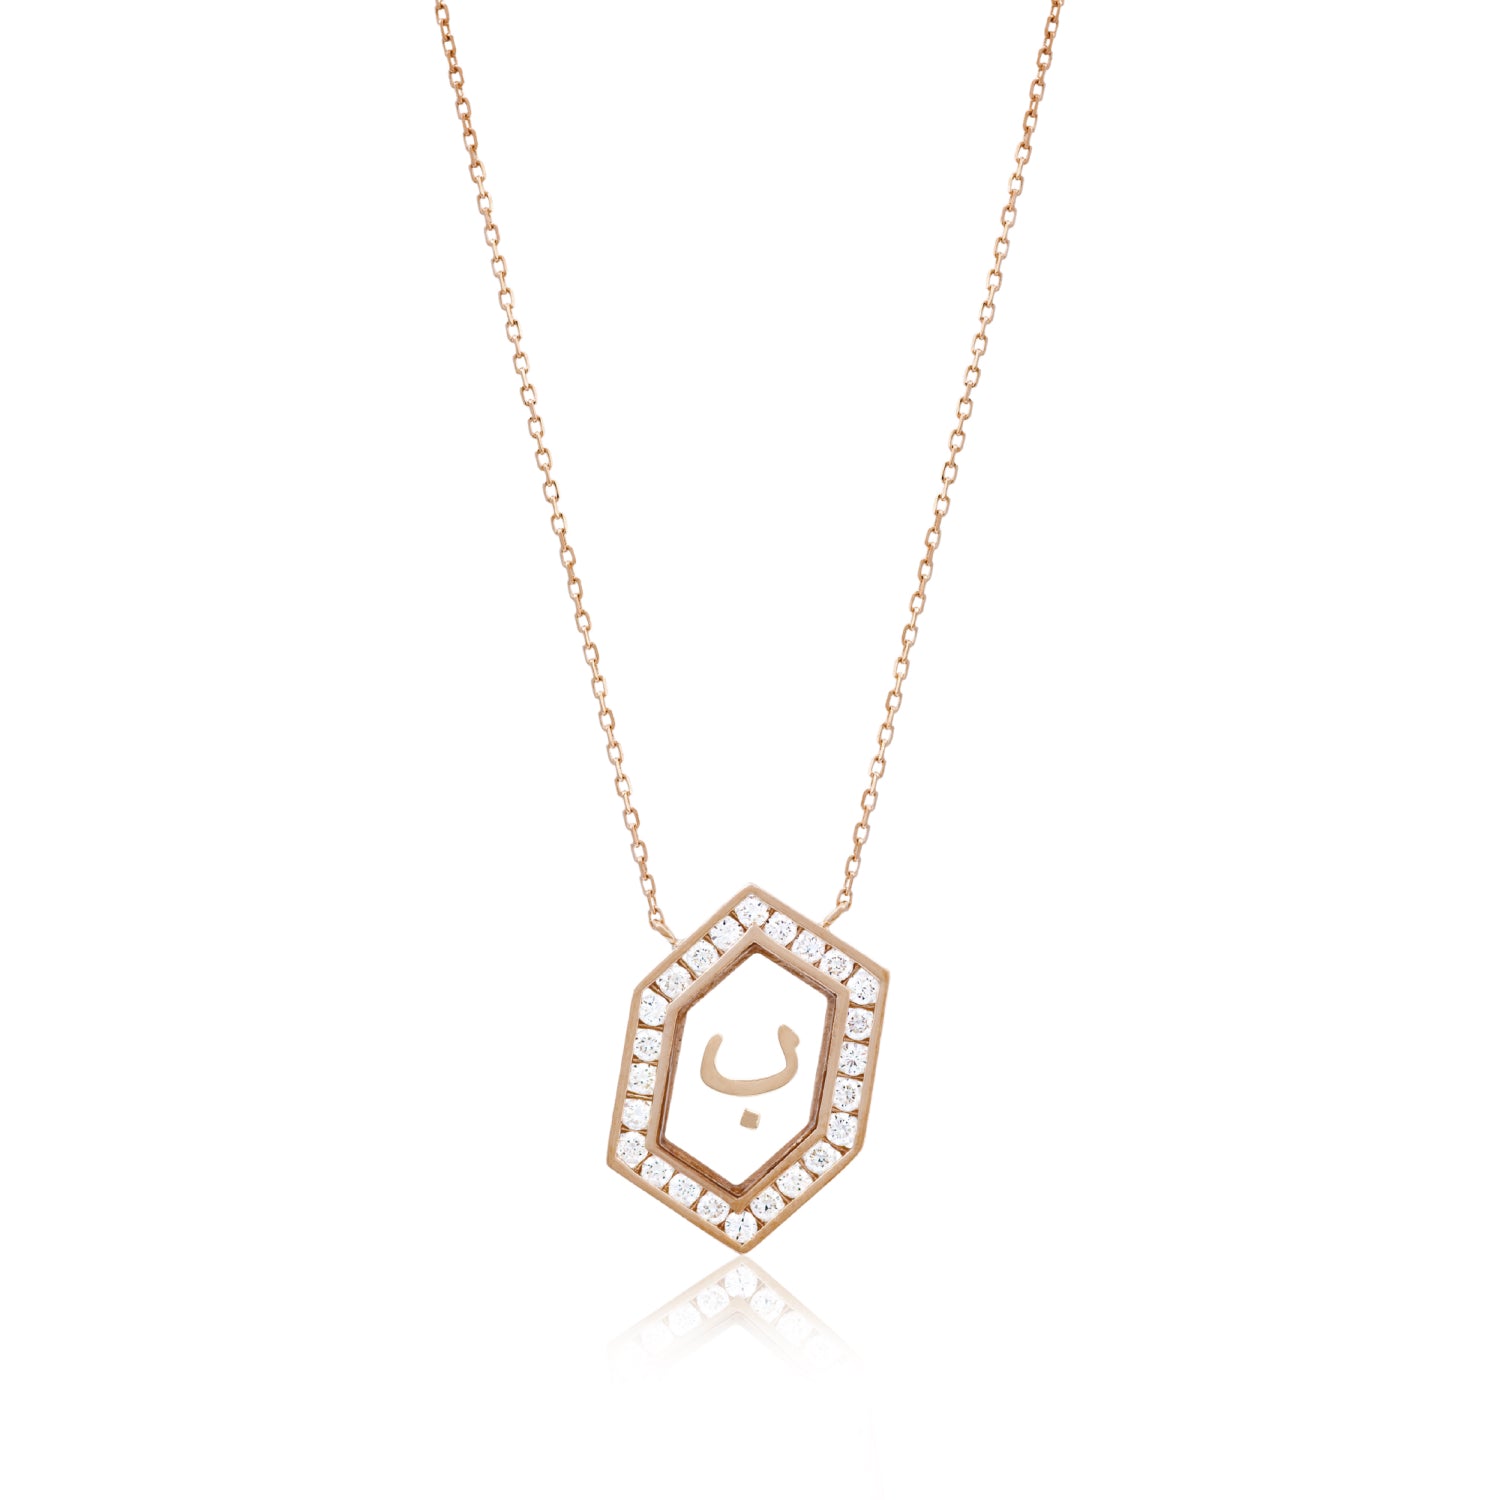 Qamoos 1.0 Letter ب Diamond Necklace in Rose Gold